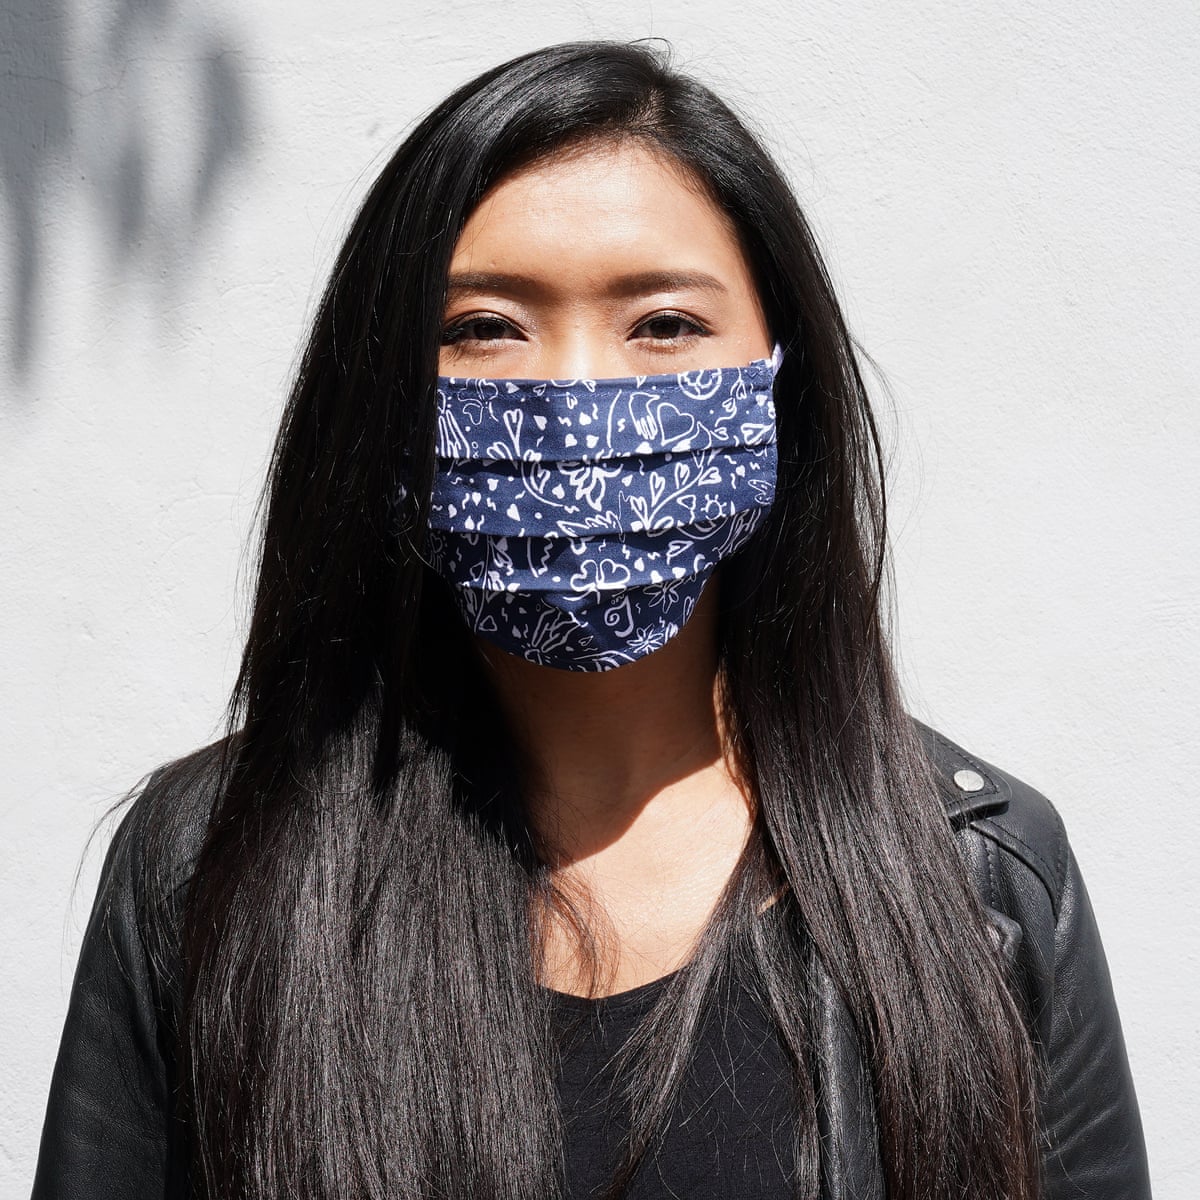 Another pretty face: how stylish masks are lightening the mood |  Coronavirus | The Guardian